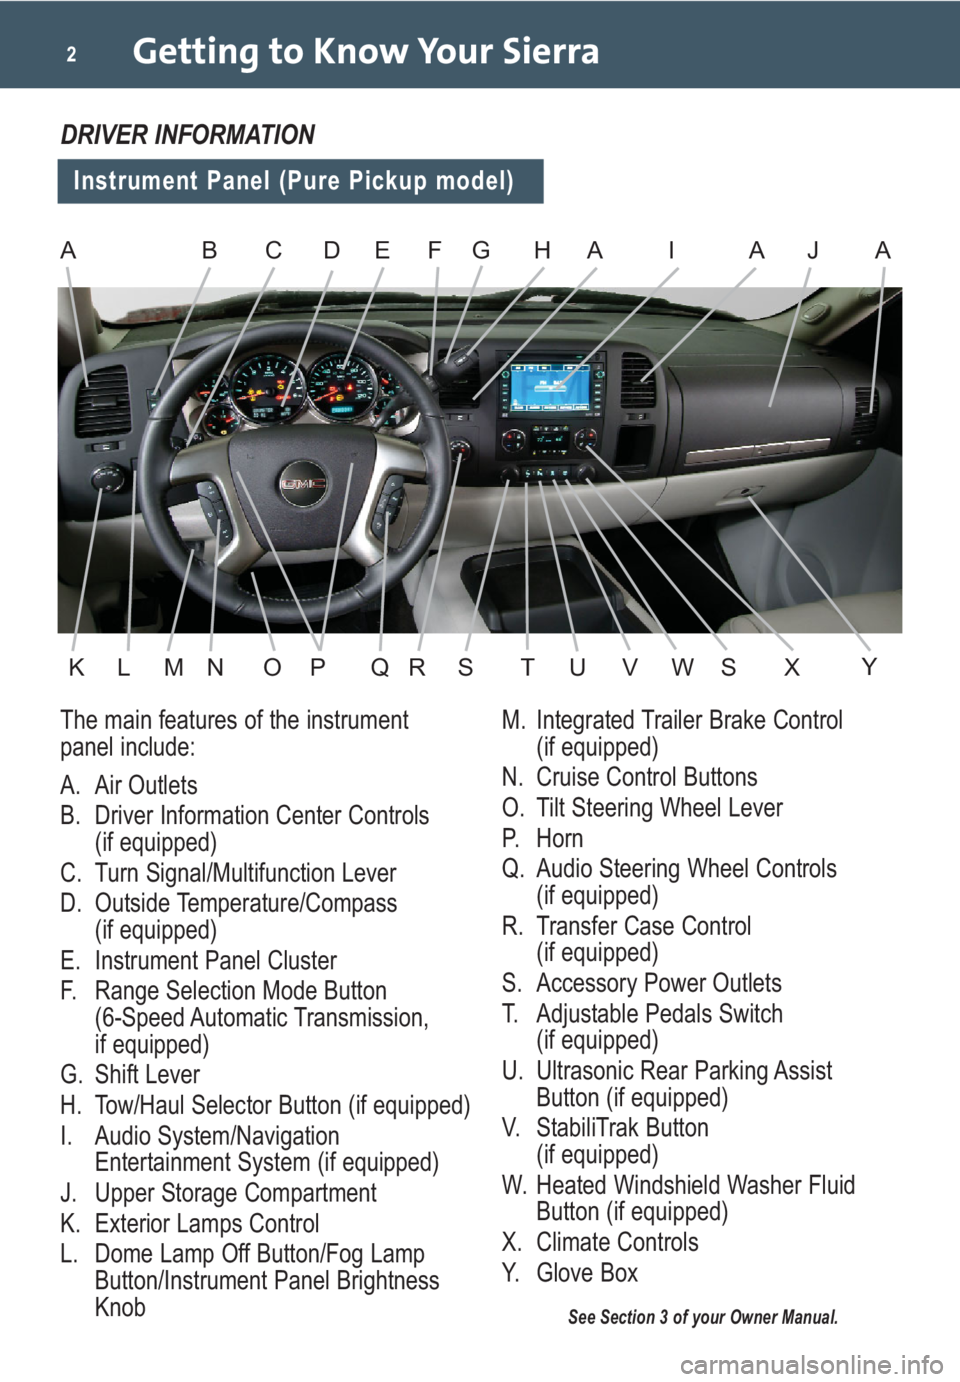 GMC SIERRA 2009  Get To Know Guide Getting to Know Your Sierra2
The main features of the instrument 
panel include:
A. Air Outlets
B. Driver Information Center Controls 
(if equipped)
C. Turn Signal/Multifunction Lever
D. Outside Tempe